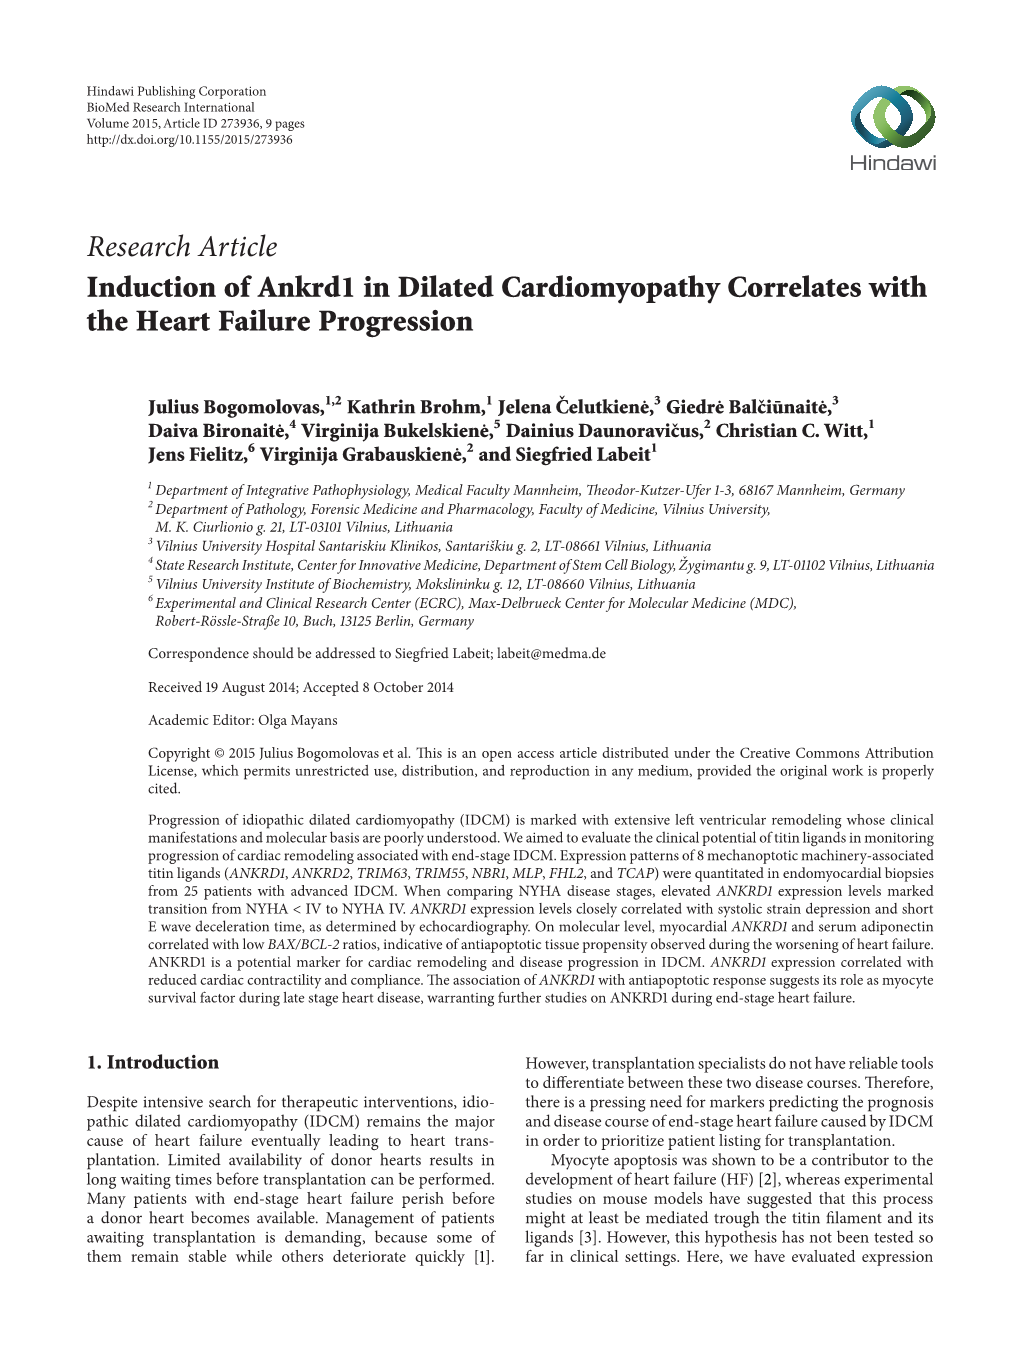 Induction of Ankrd1 in Dilated Cardiomyopathy Correlates with the Heart Failure Progression